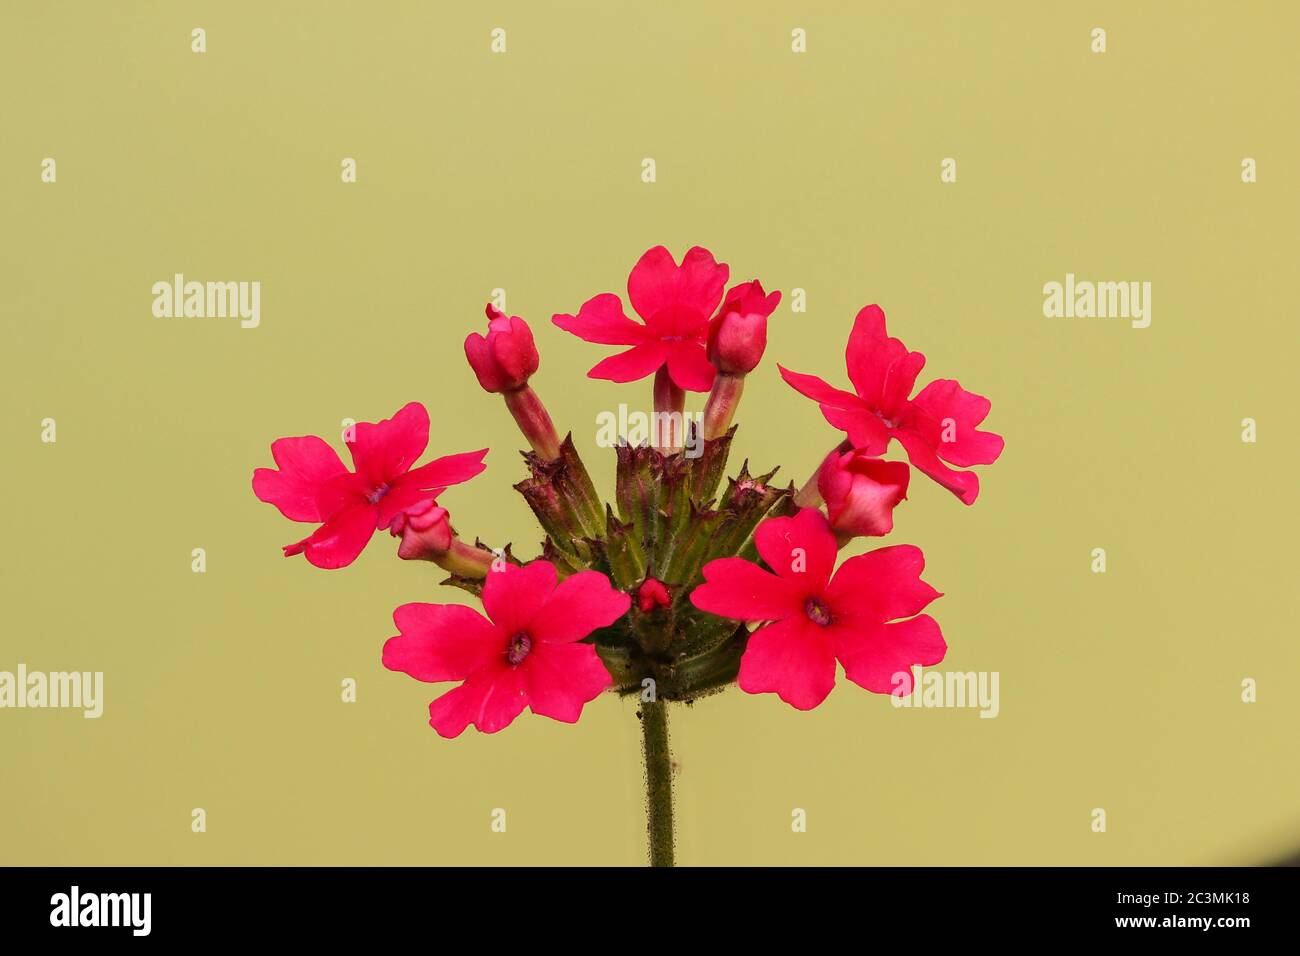 Close-up of argentinian verbena blossom against light green background Stock Photo